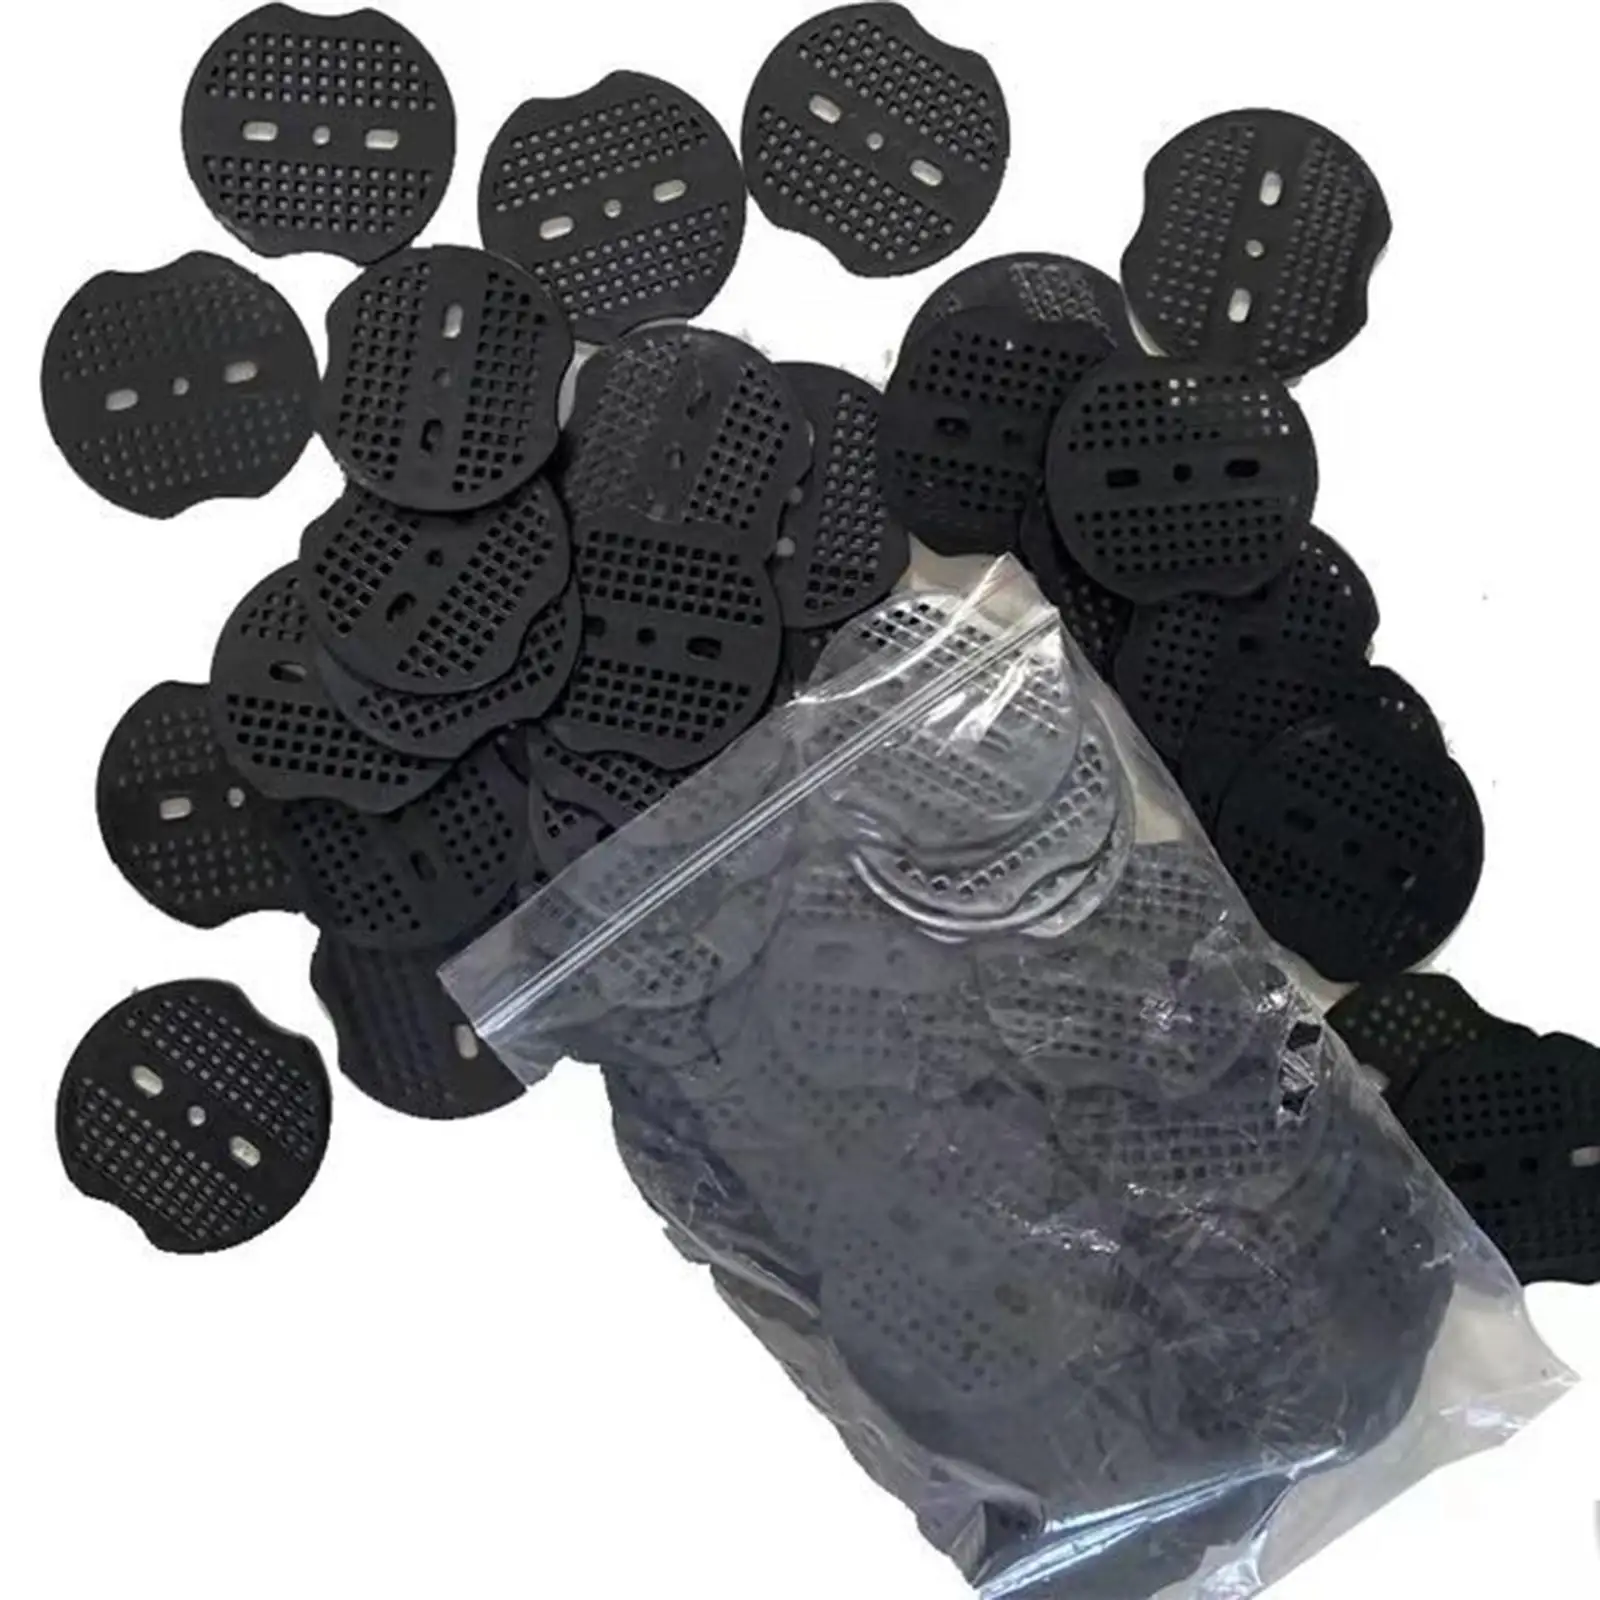 50 Pieces Round Tent Stake Gaskets for Landscaping Ground Covering